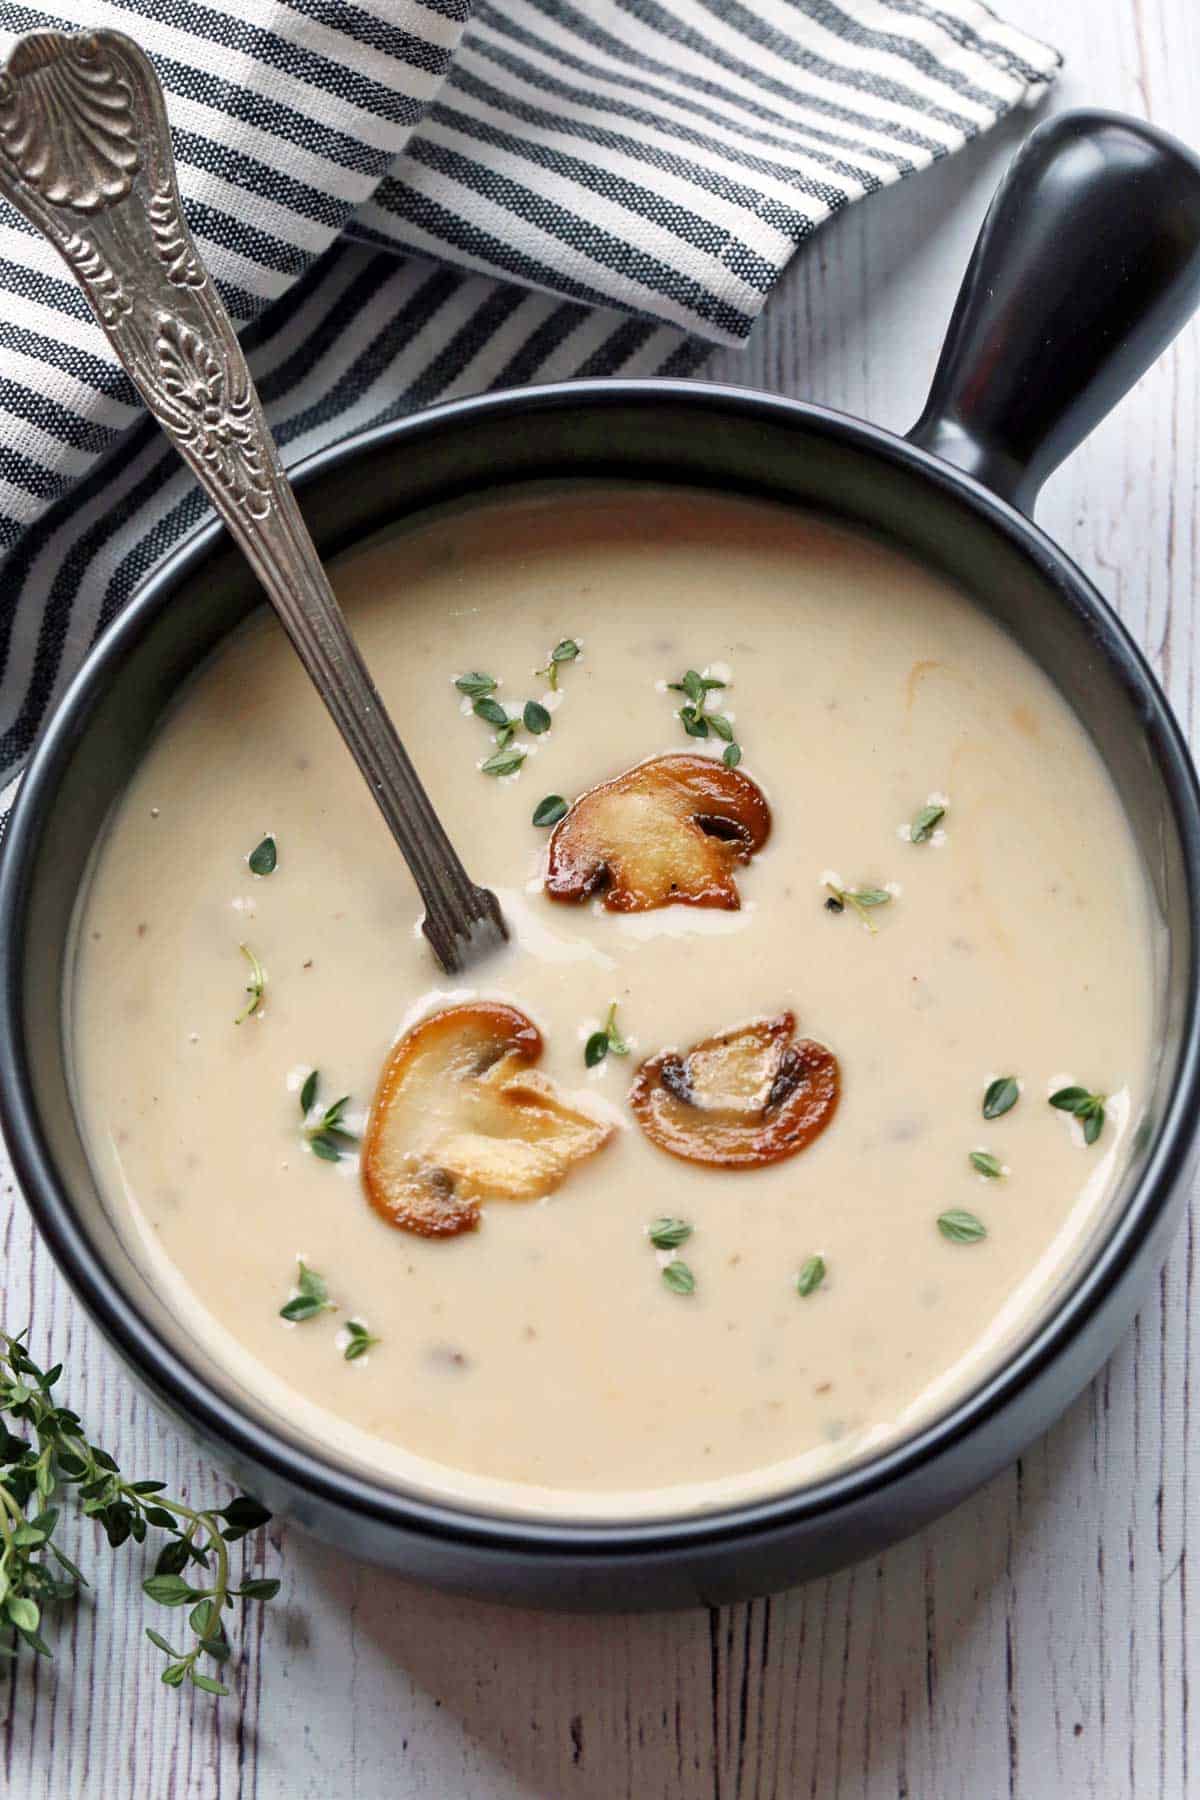 Cream of mushroom soup served in a black soup bowl and garnished with mushrooms.  